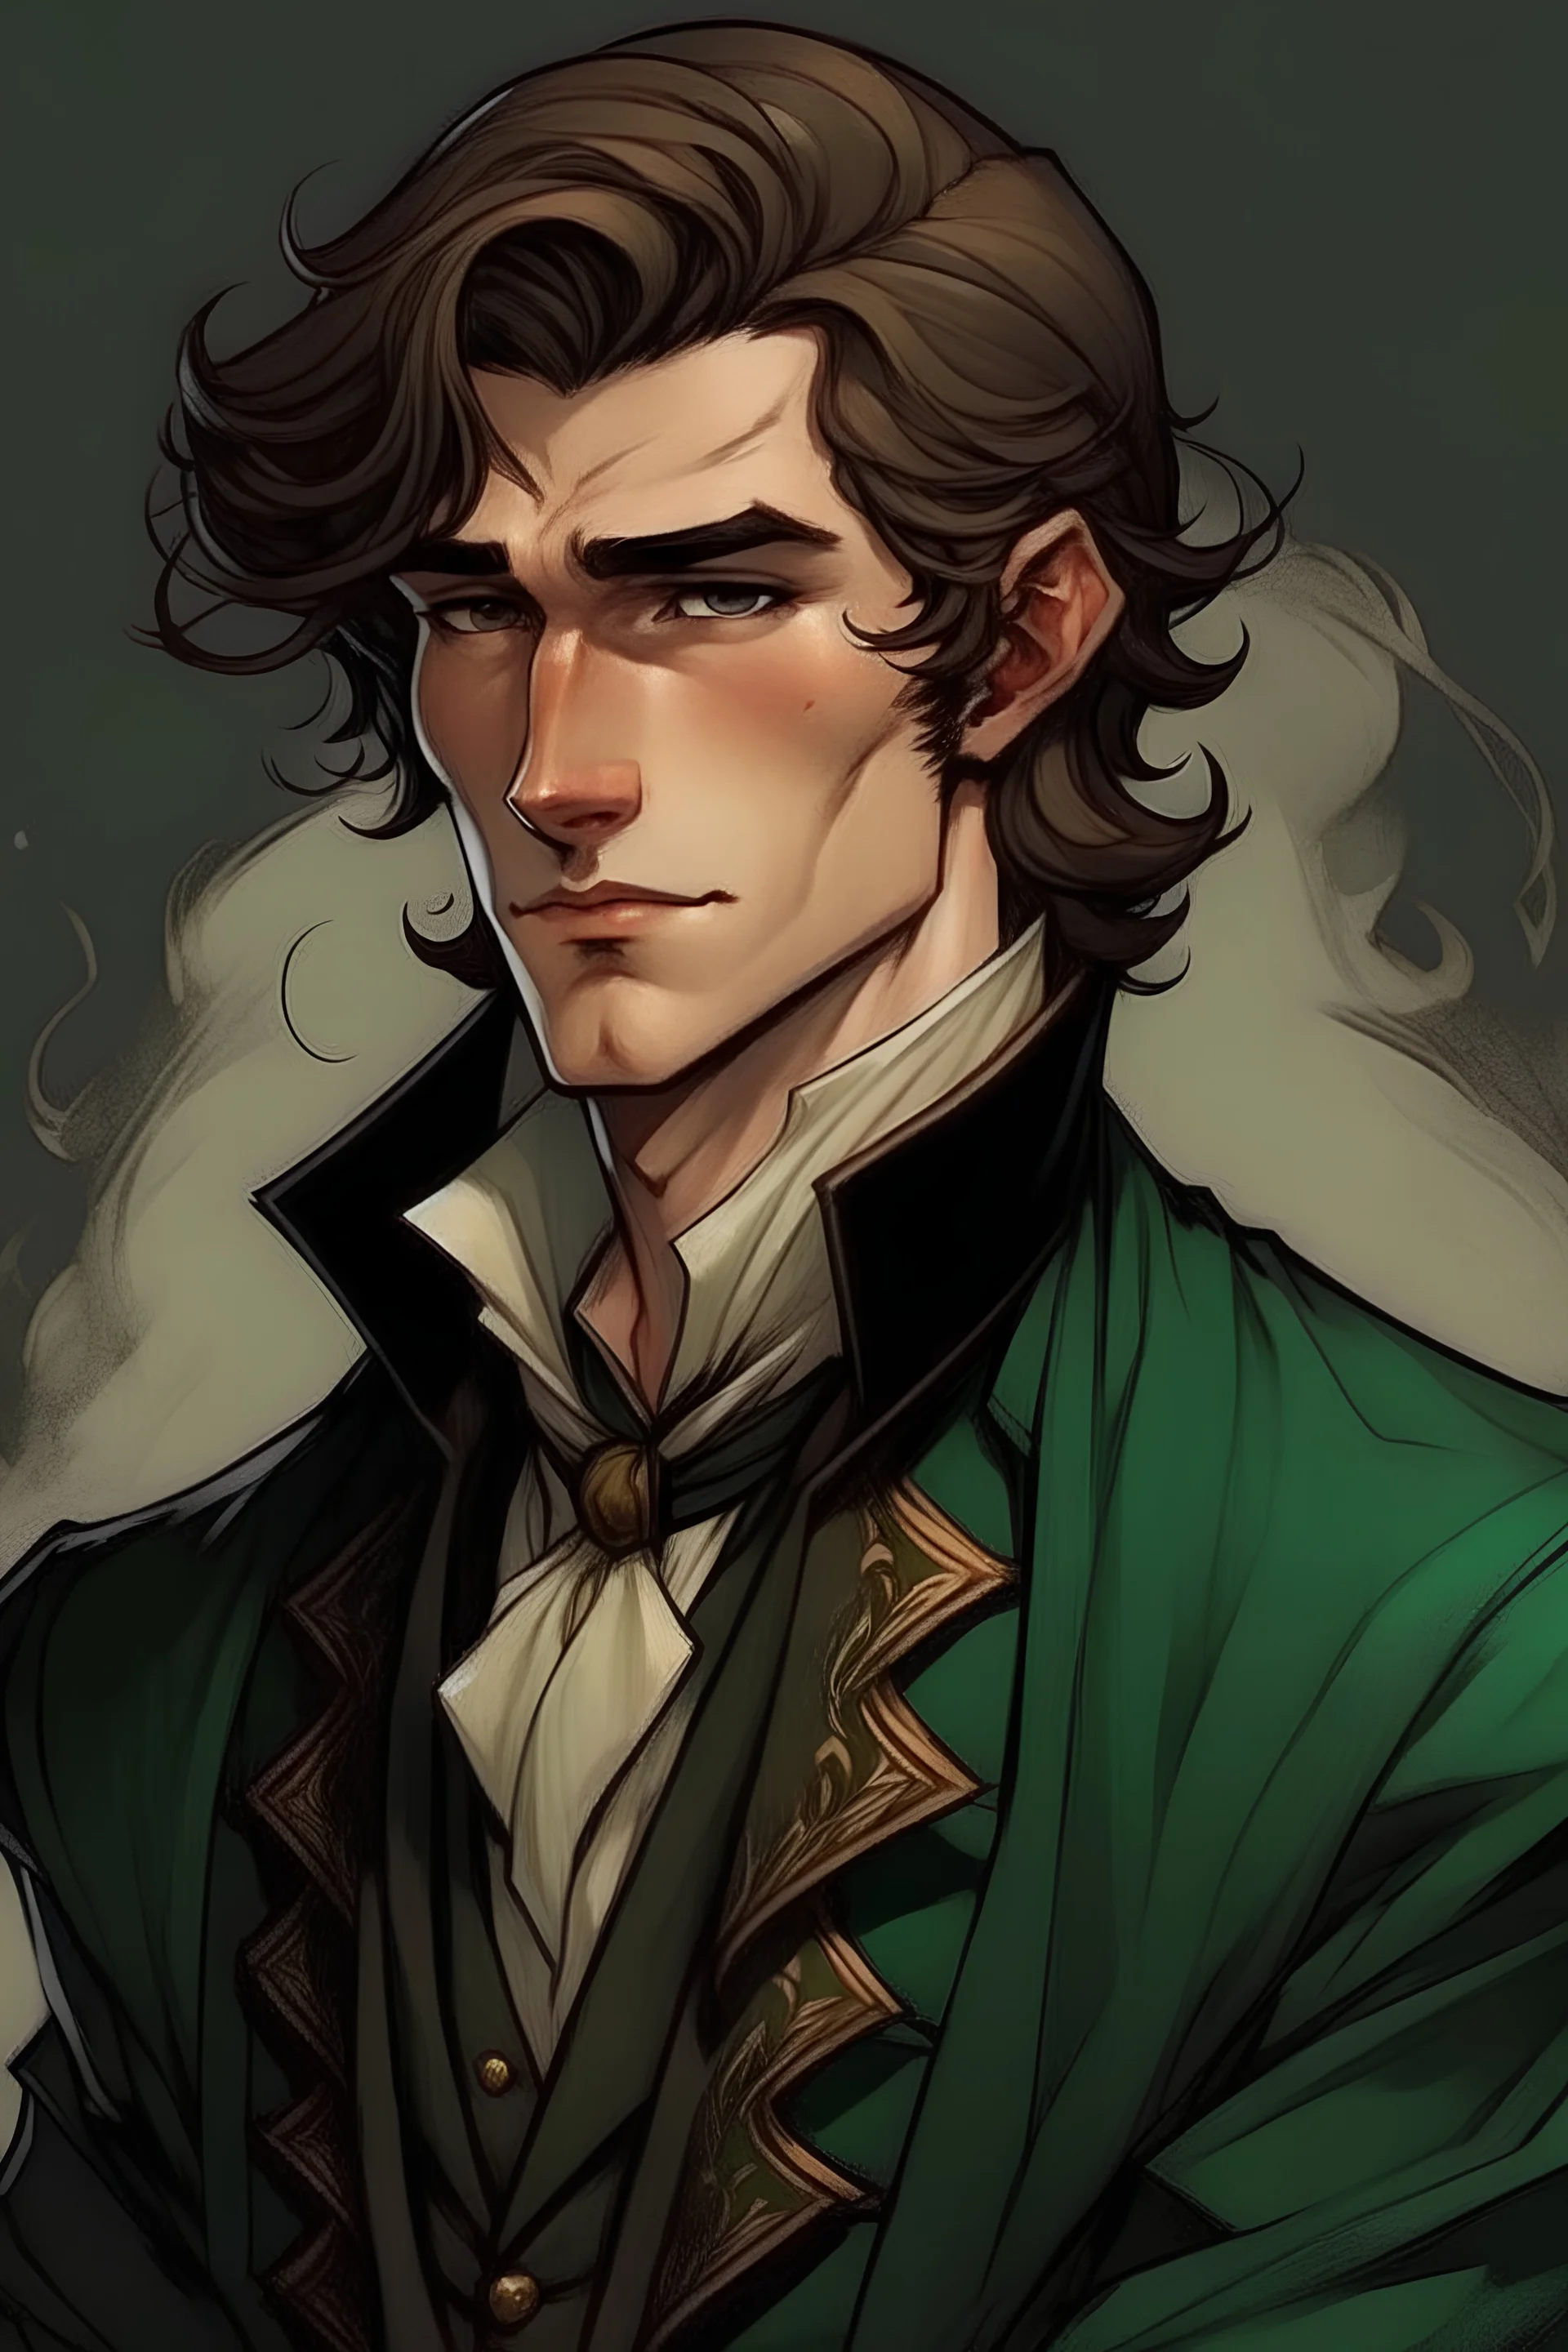 give me picture of cardan greenbriar from the cruel prince book, he is 19 y o youngeer